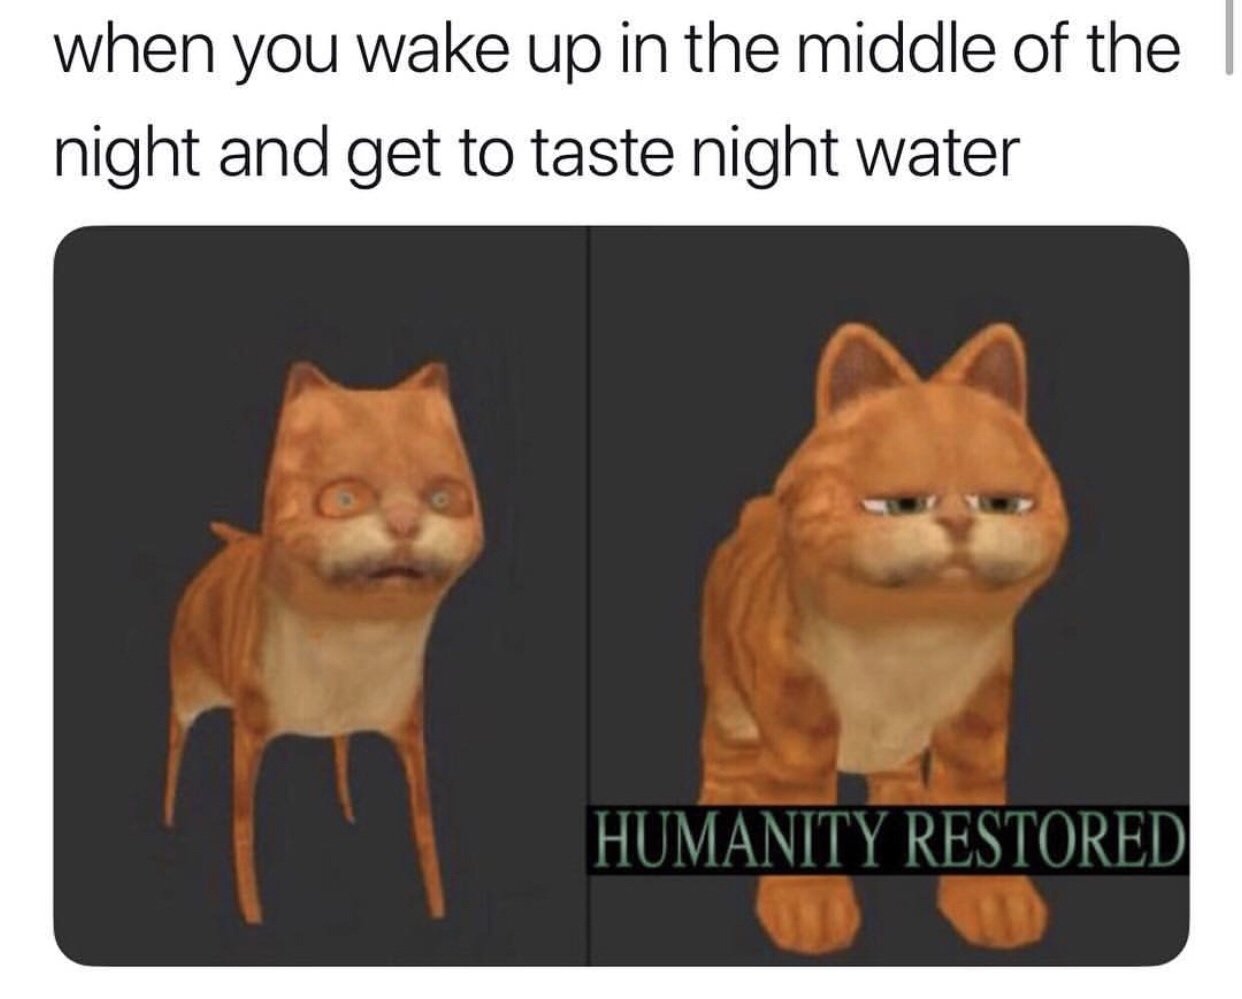 memes - get to taste night water - when you wake up in the middle of the night and get to taste night water Humanity Restored